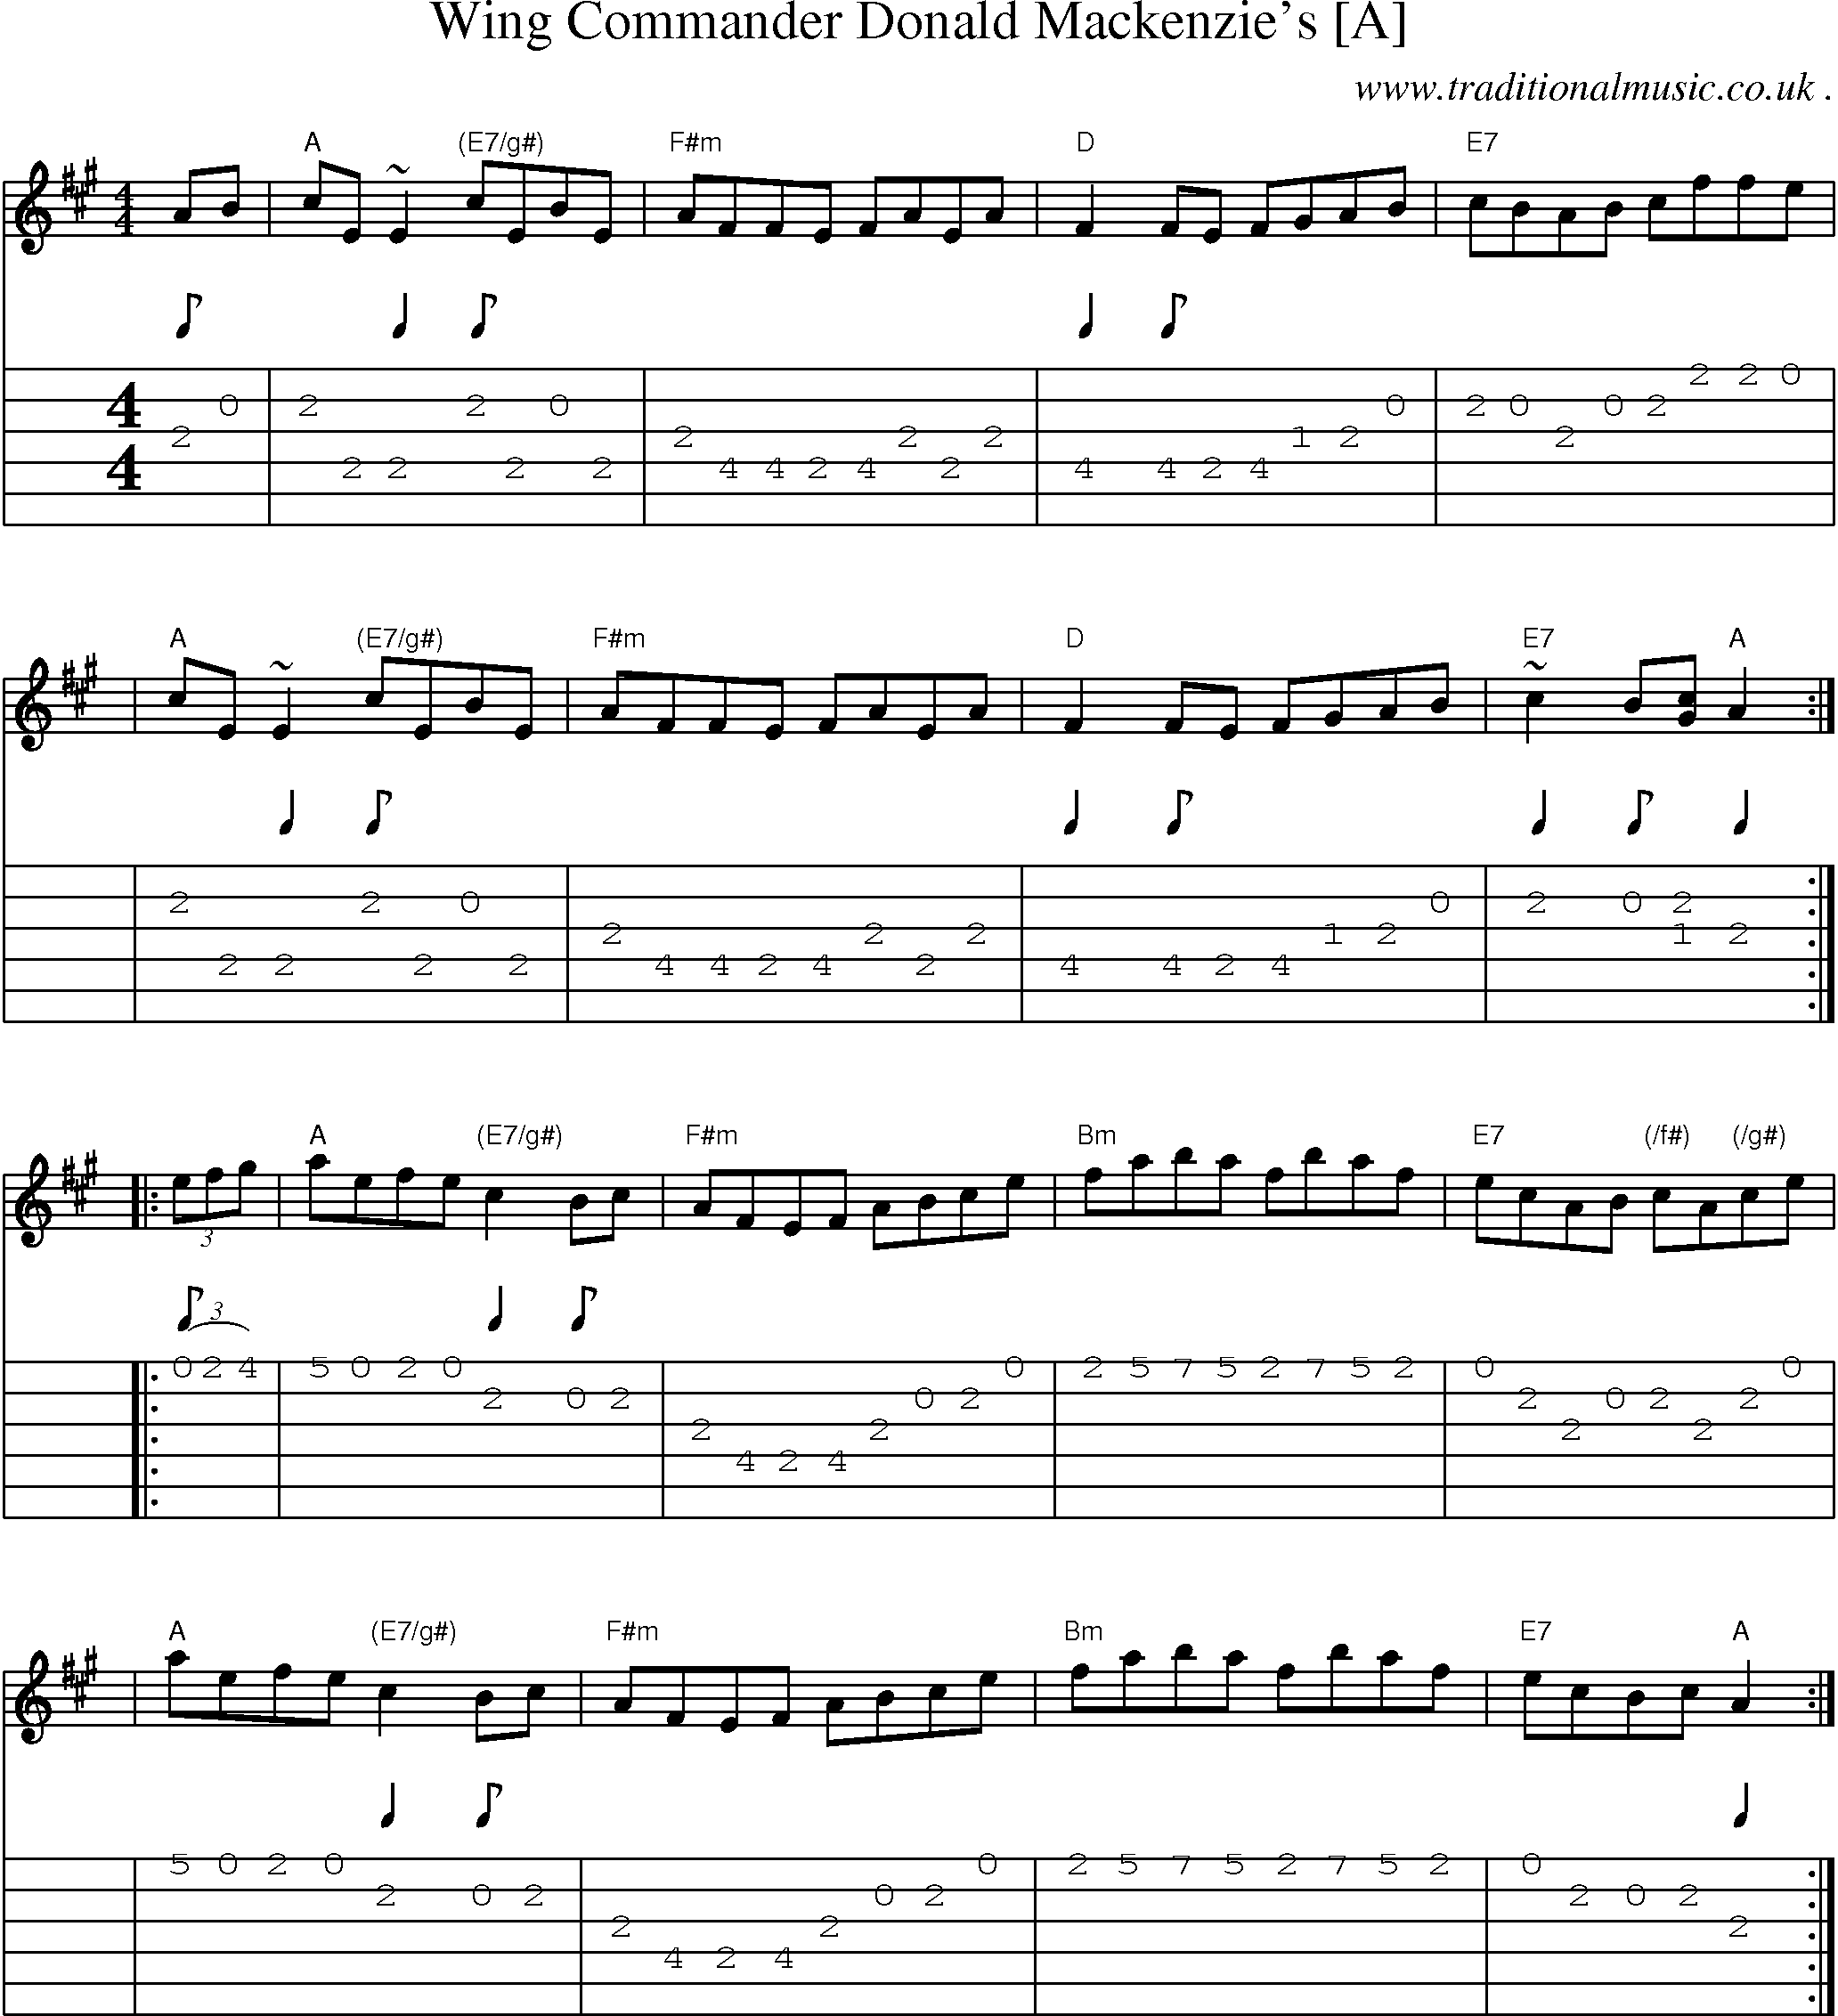 Sheet-music  score, Chords and Guitar Tabs for Wing Commander Donald Mackenzies [a]